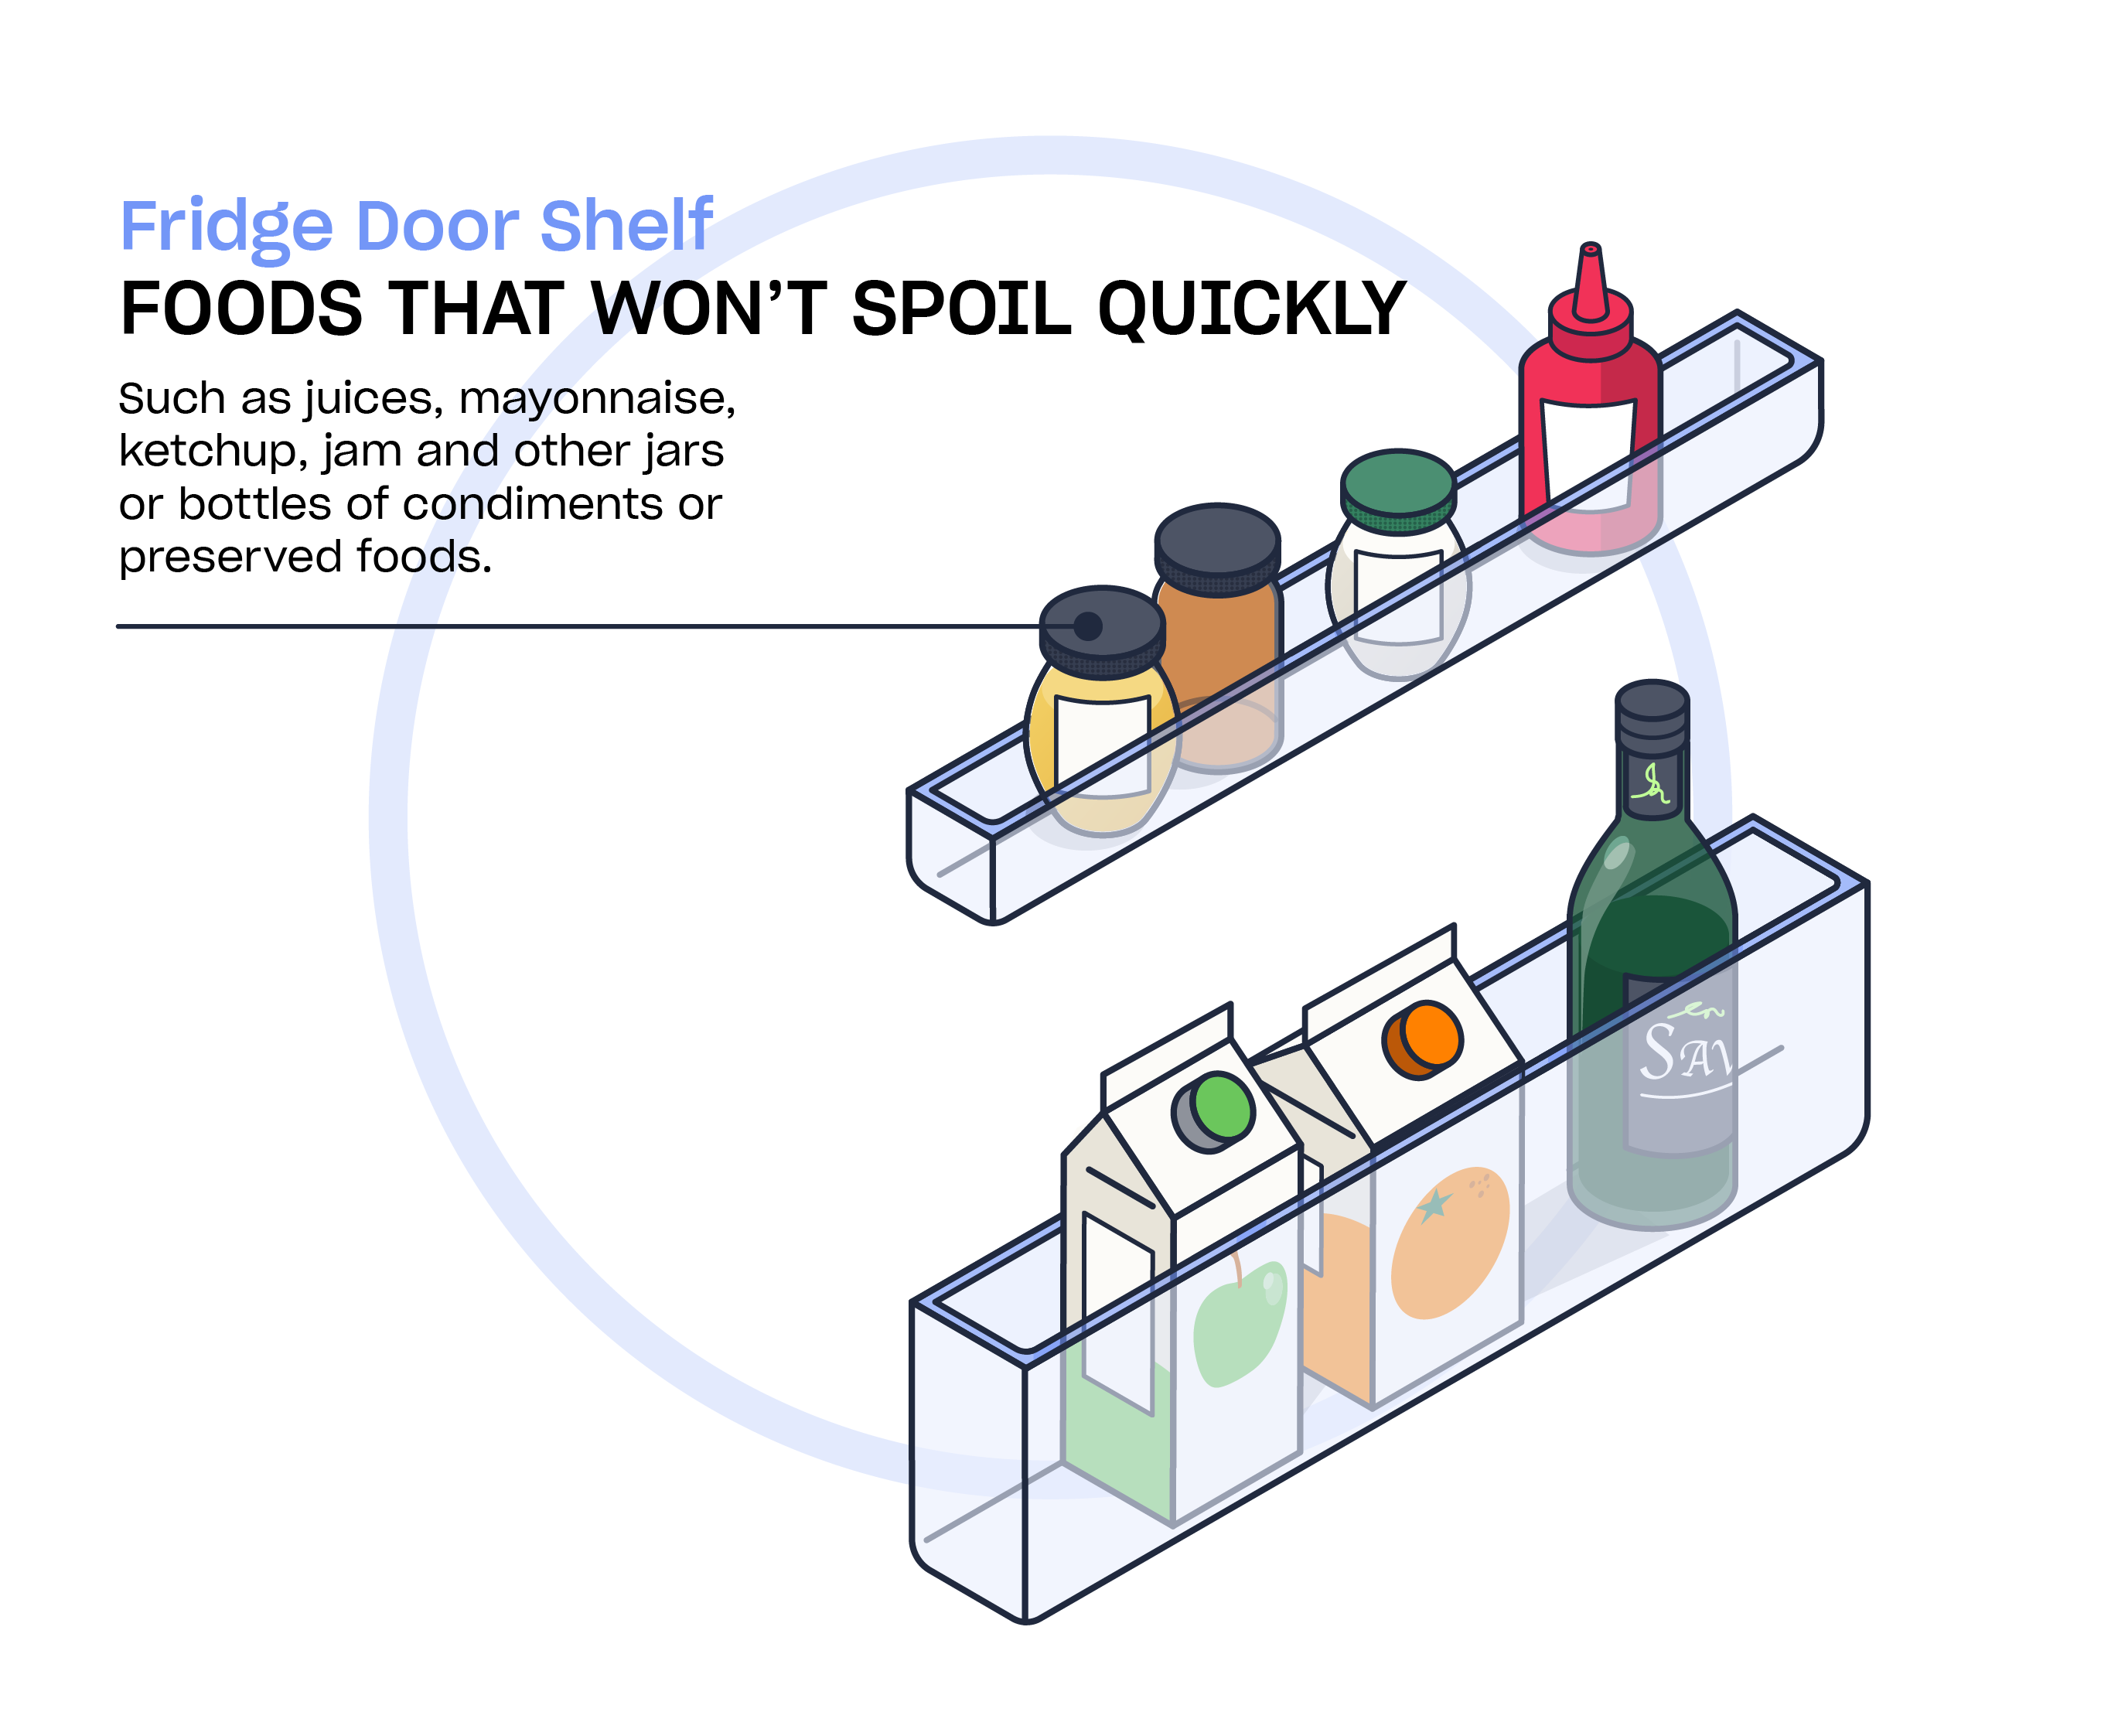 5 Simple Rules for Effective & Hygienic Dry Goods Storage - The